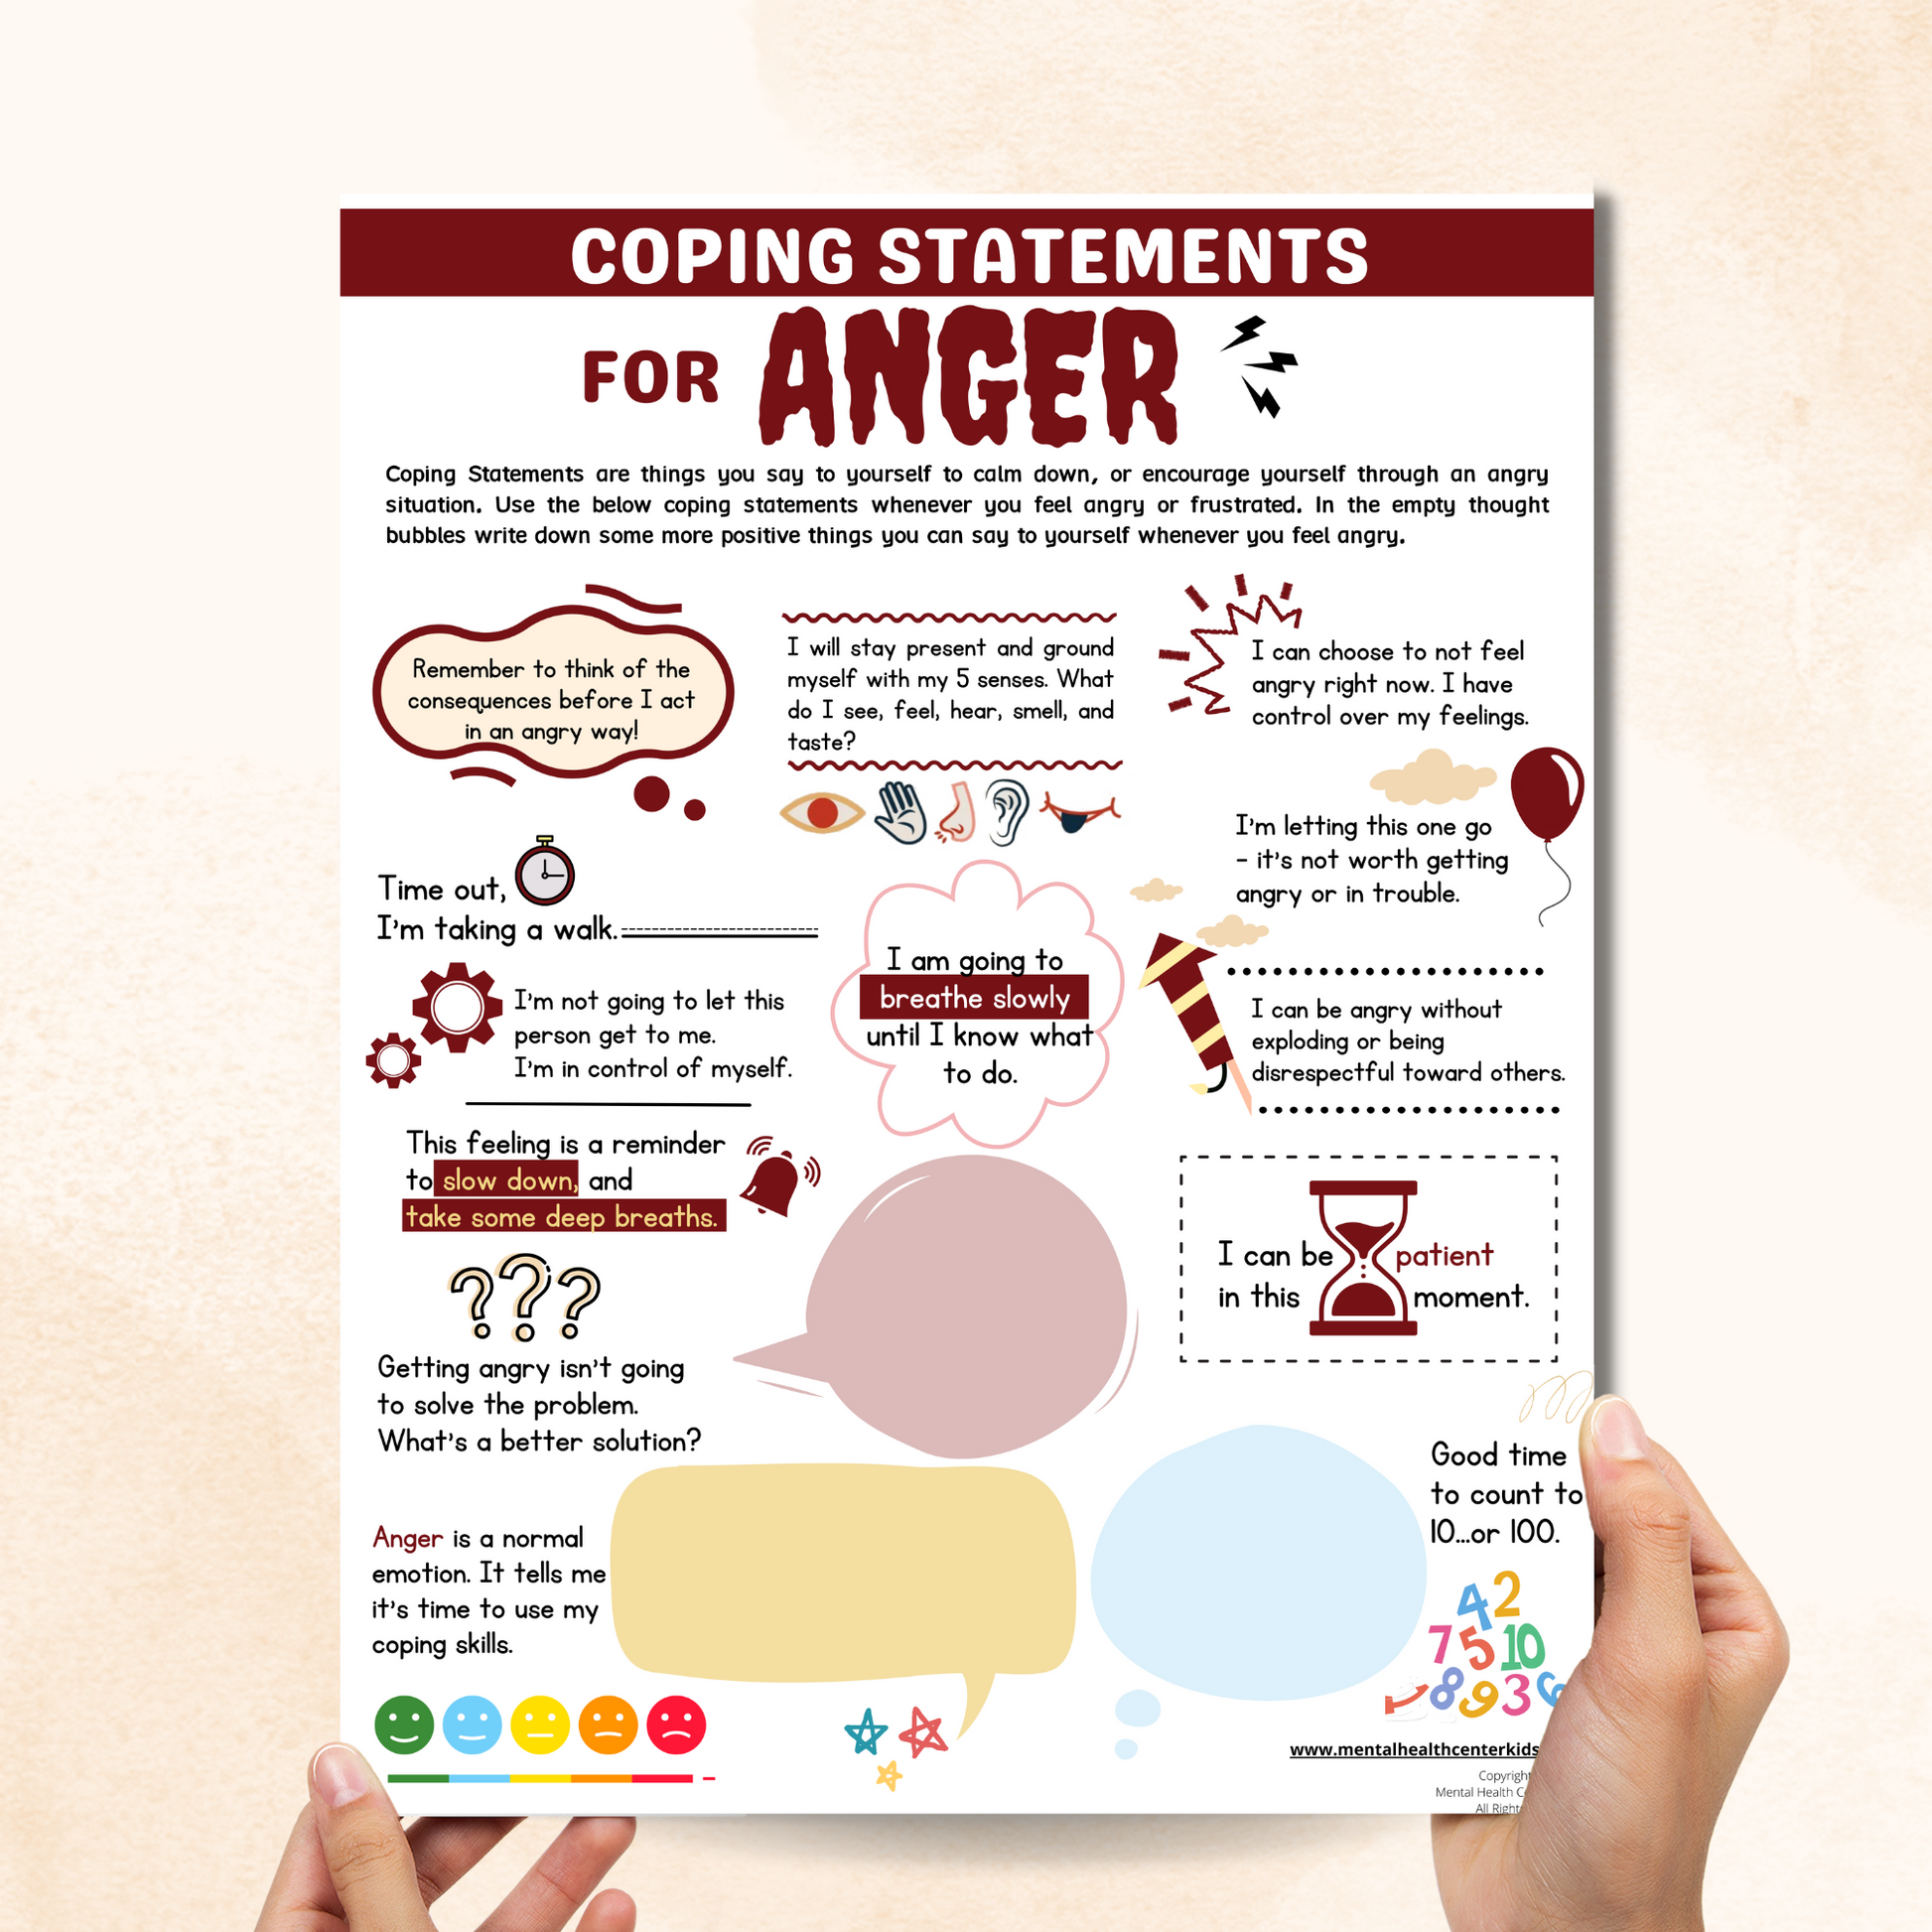 Coping Statements for Anger